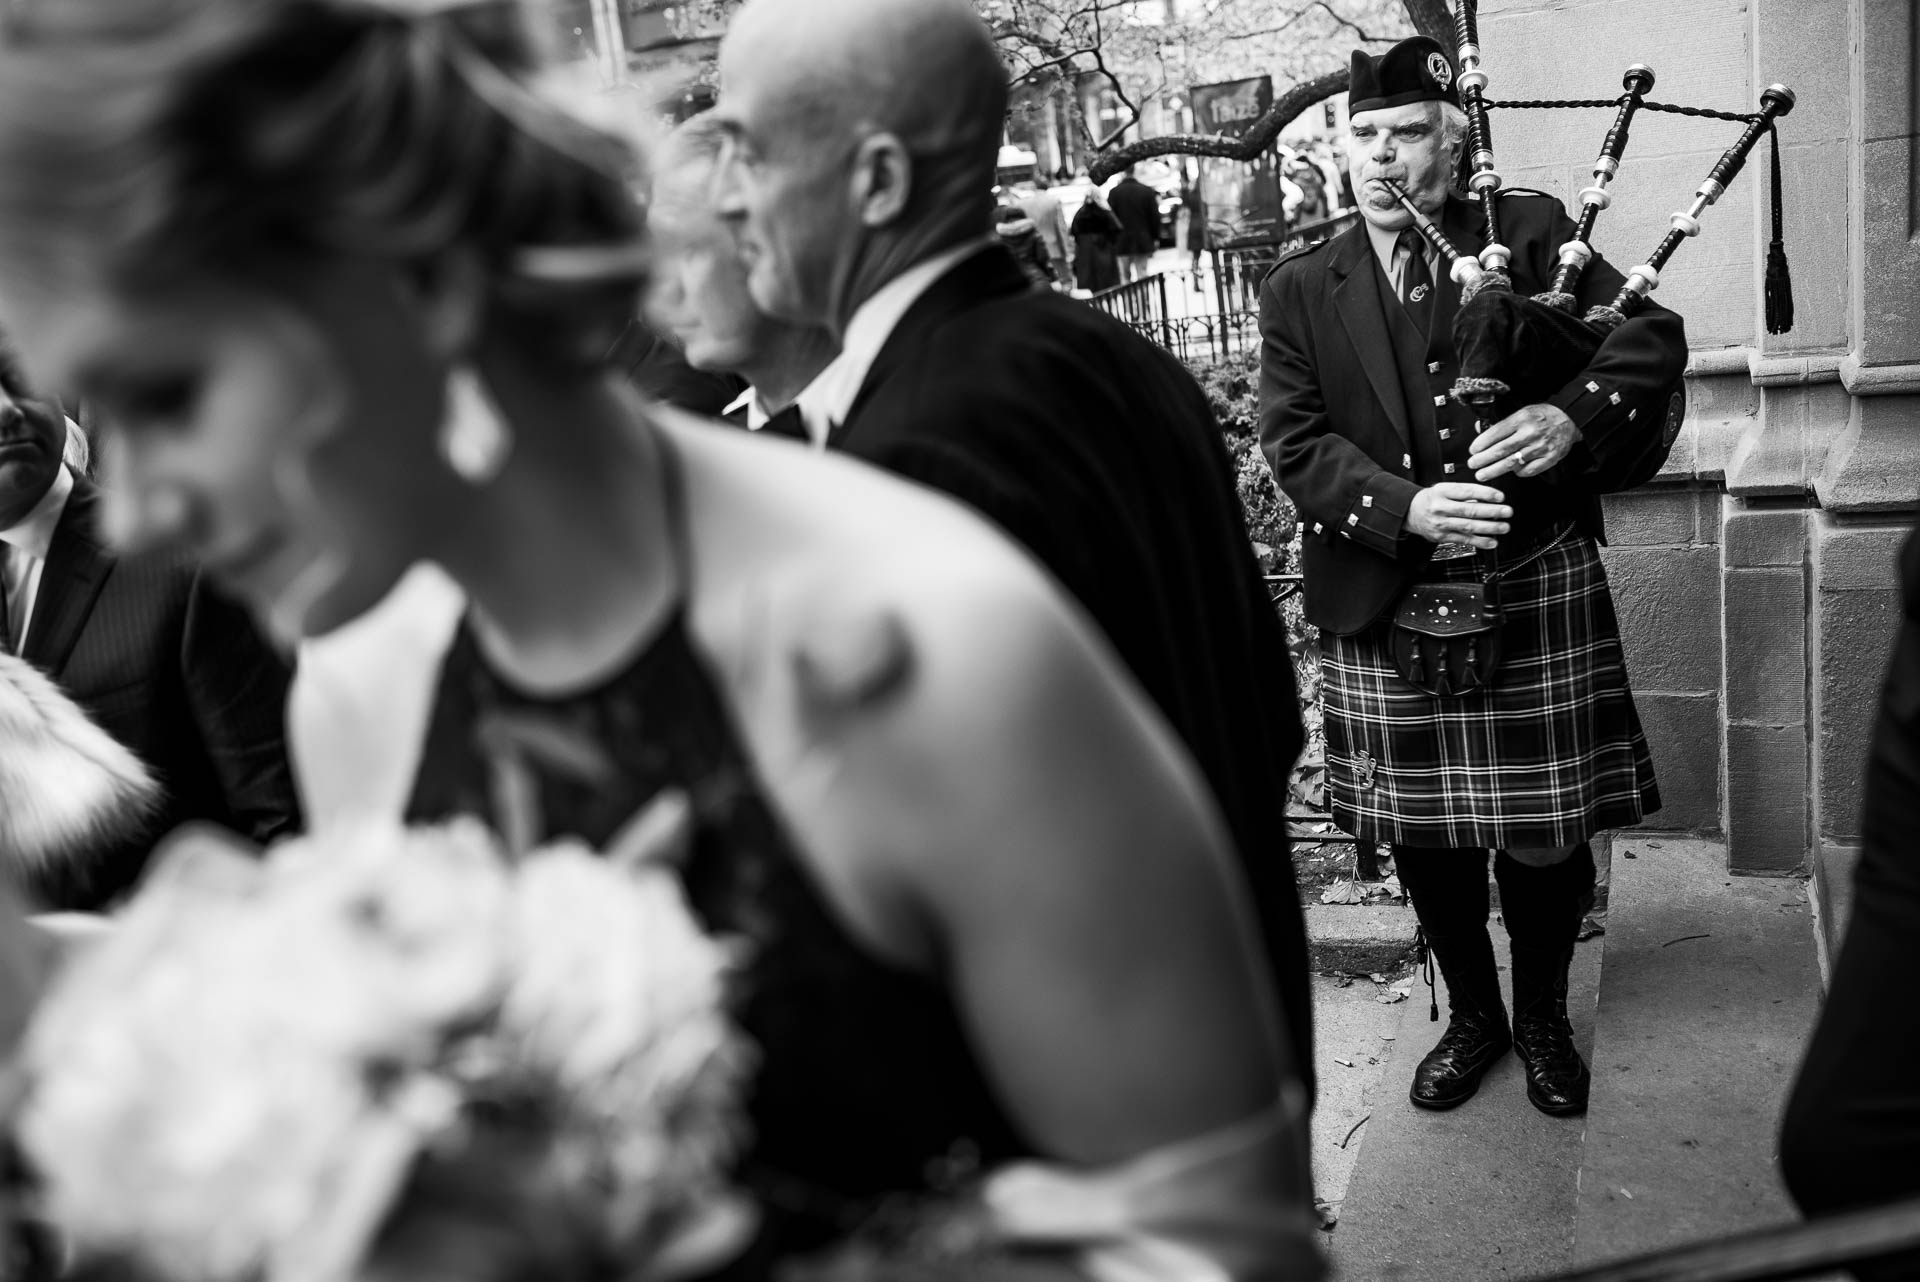 Bagpiper plays after a wedding ceremony at Fourth Presbyterian Church in Chicago.